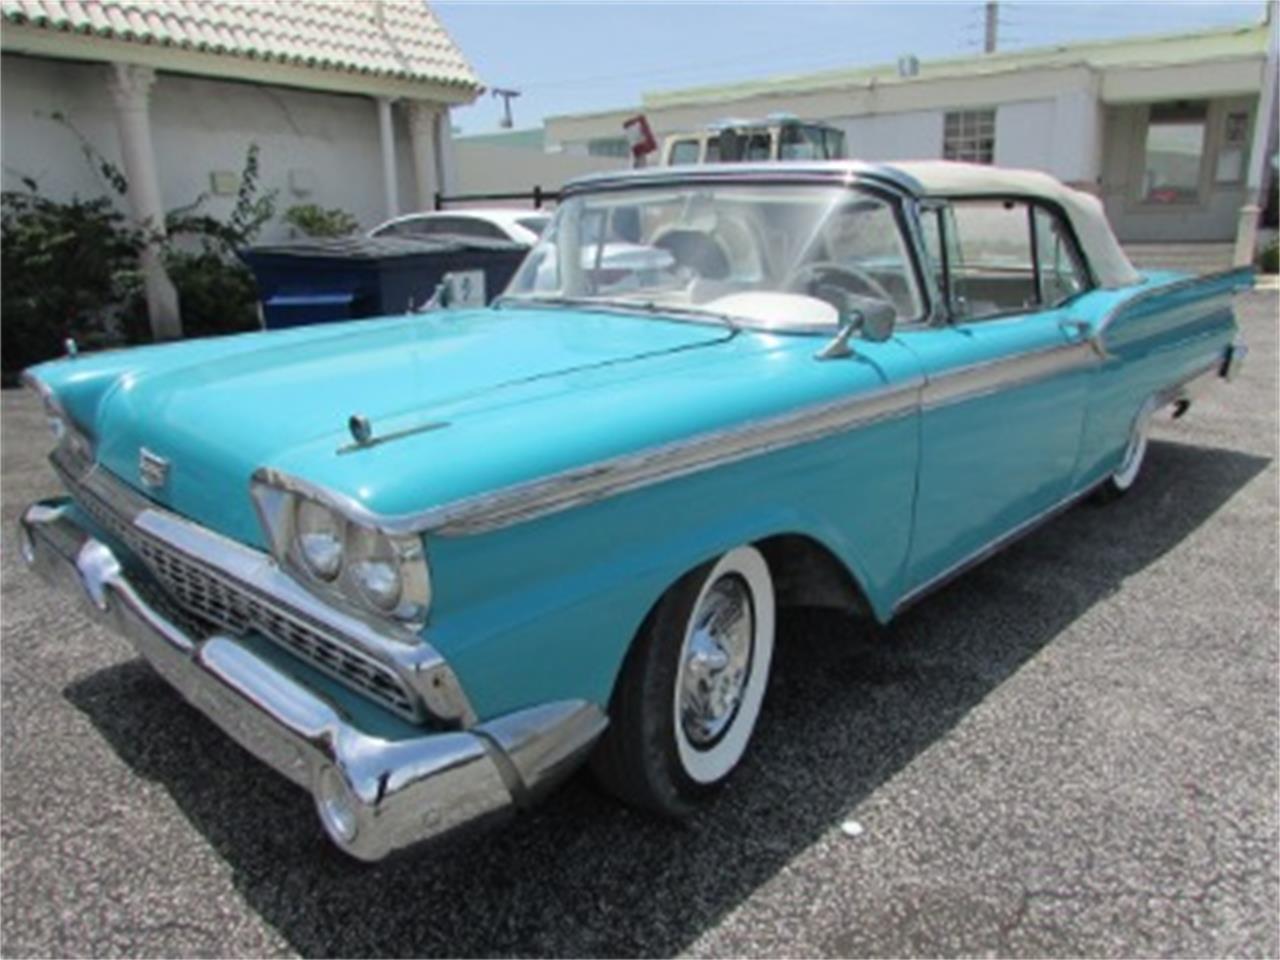 For Sale: 1959 Ford Galaxie in Miami, Florida.